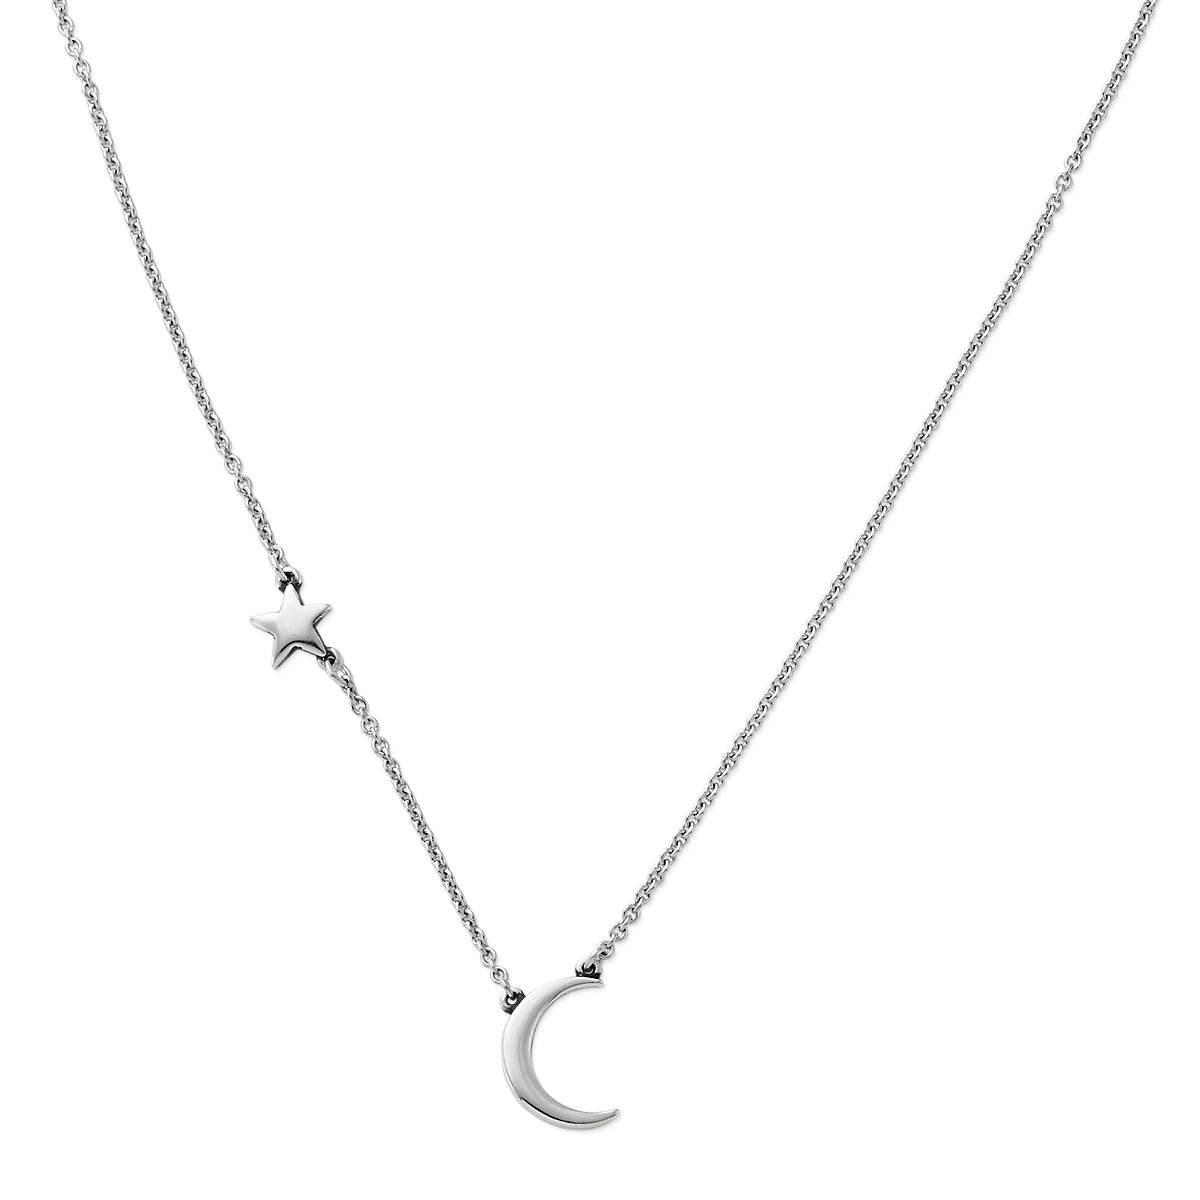 Minimalist Jewelry Gift for Her Delicate Tiny Charm Necklace Layering Necklace Dainty Moon and Star Necklace Star Necklace,Moon Necklace